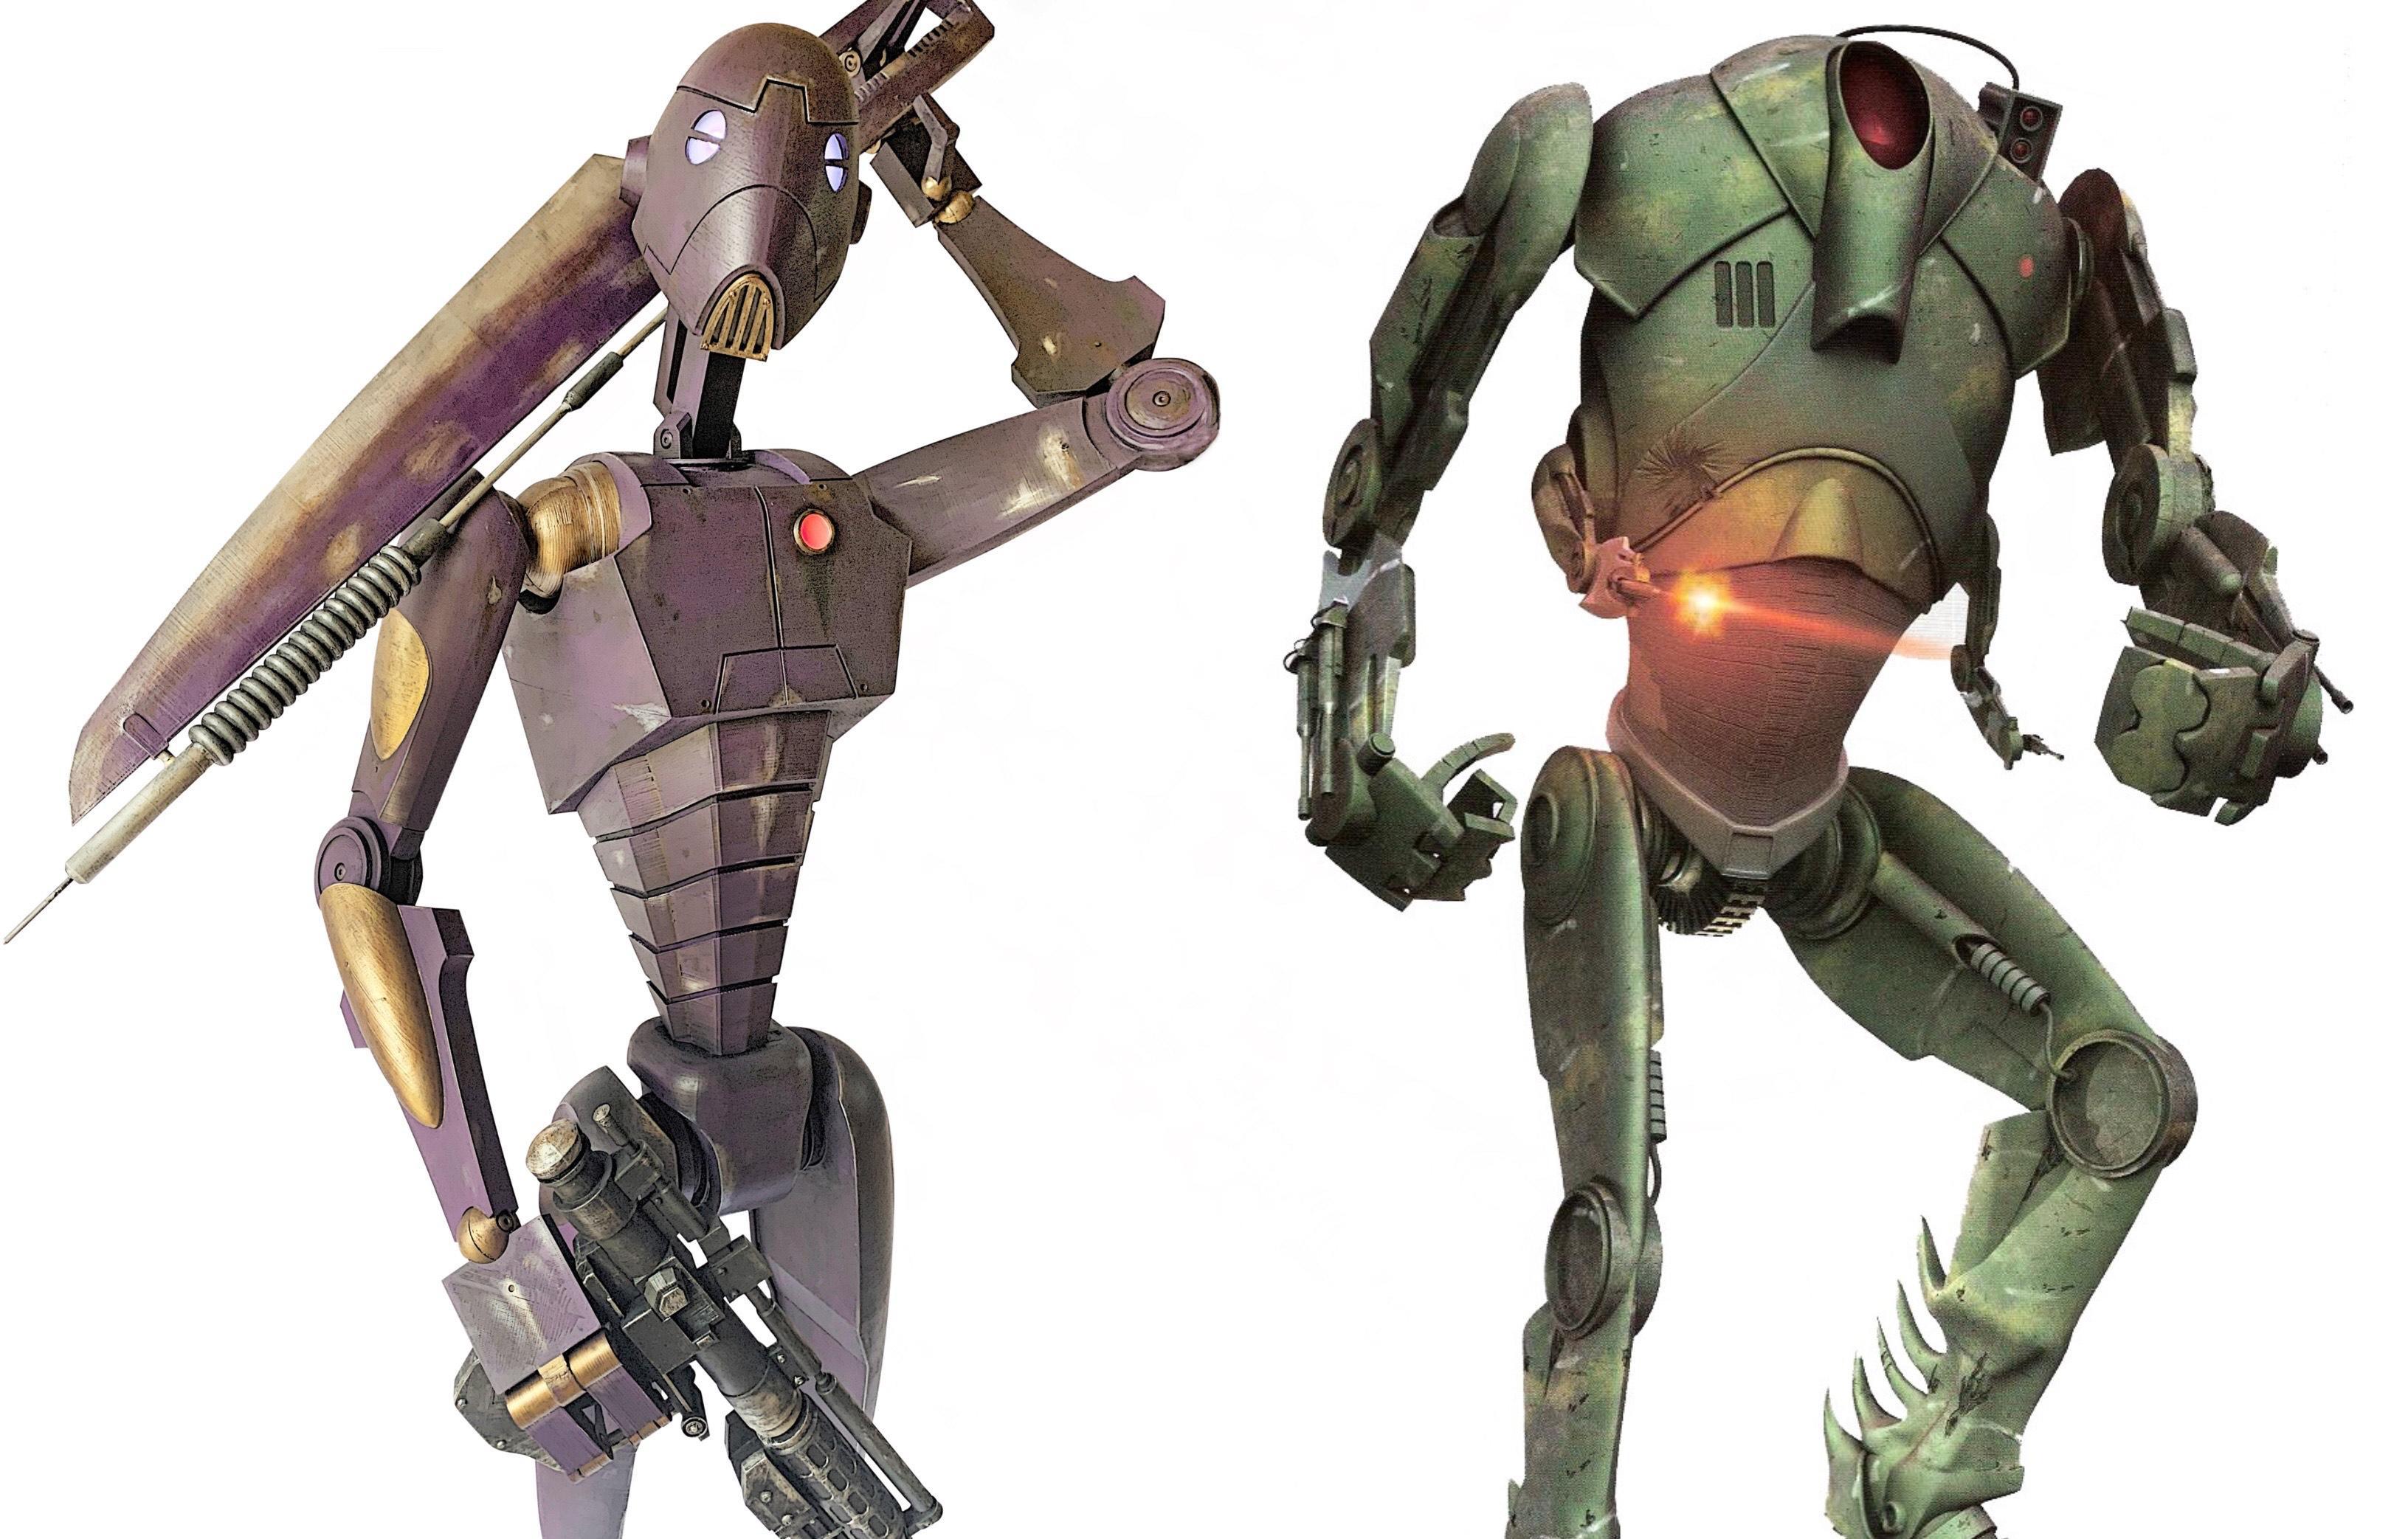 Ever Wondered What A Bx Mando Droid Or B3 Ultra Battle